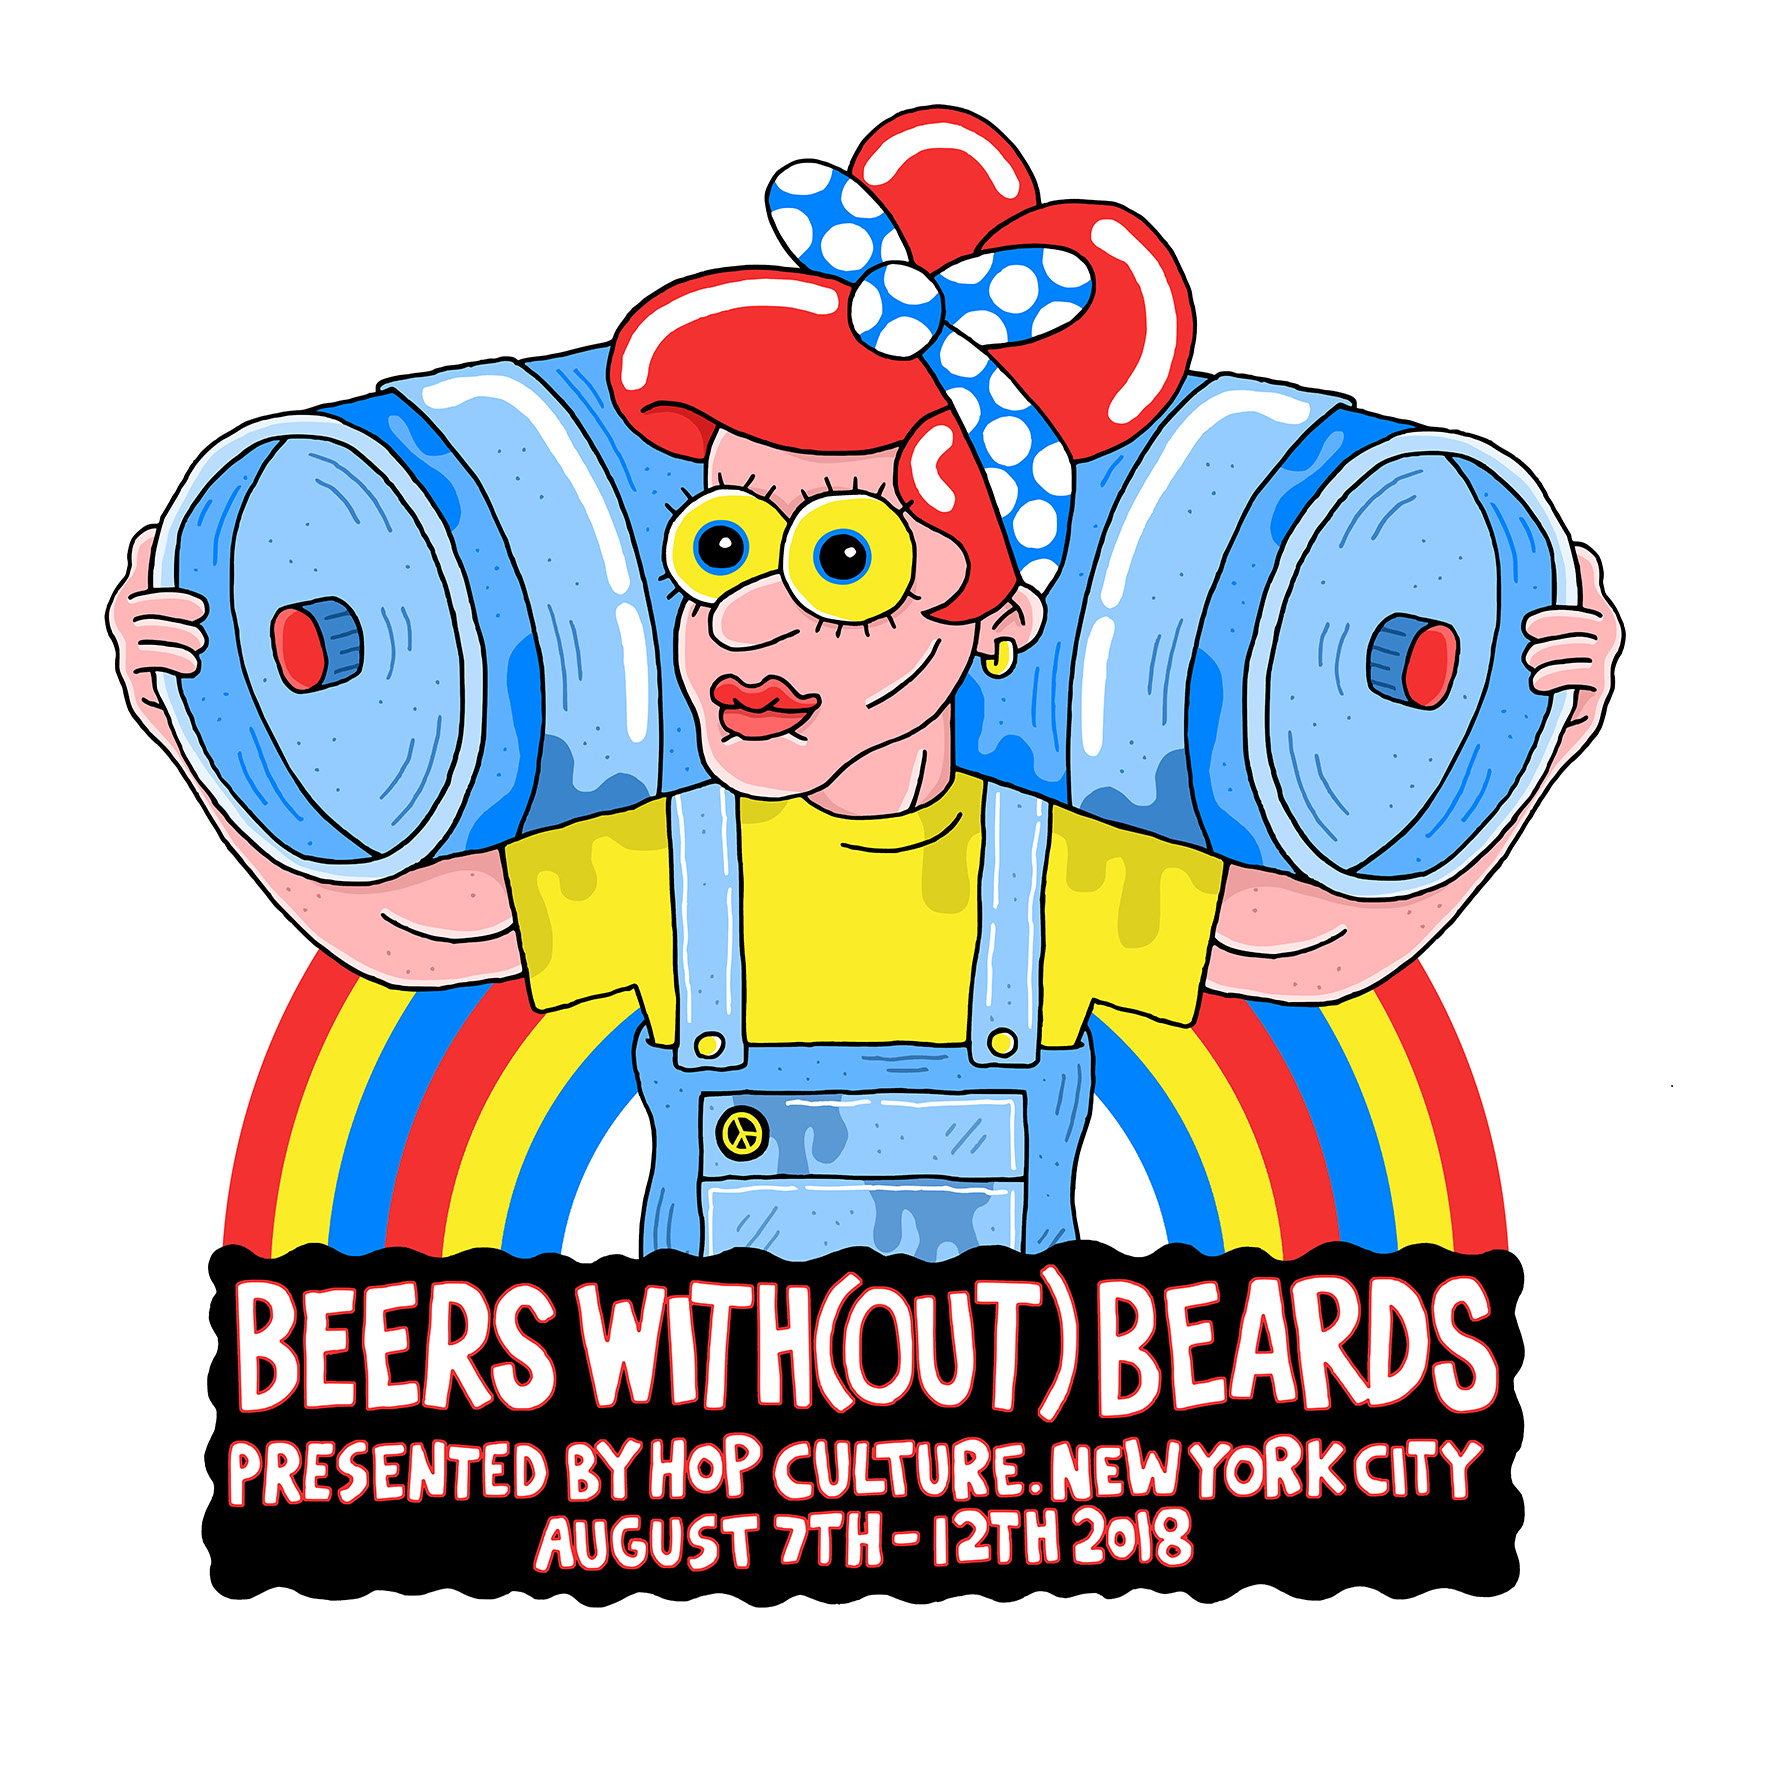 Hop Culture Announces Beers With(out) Beards Design Contest